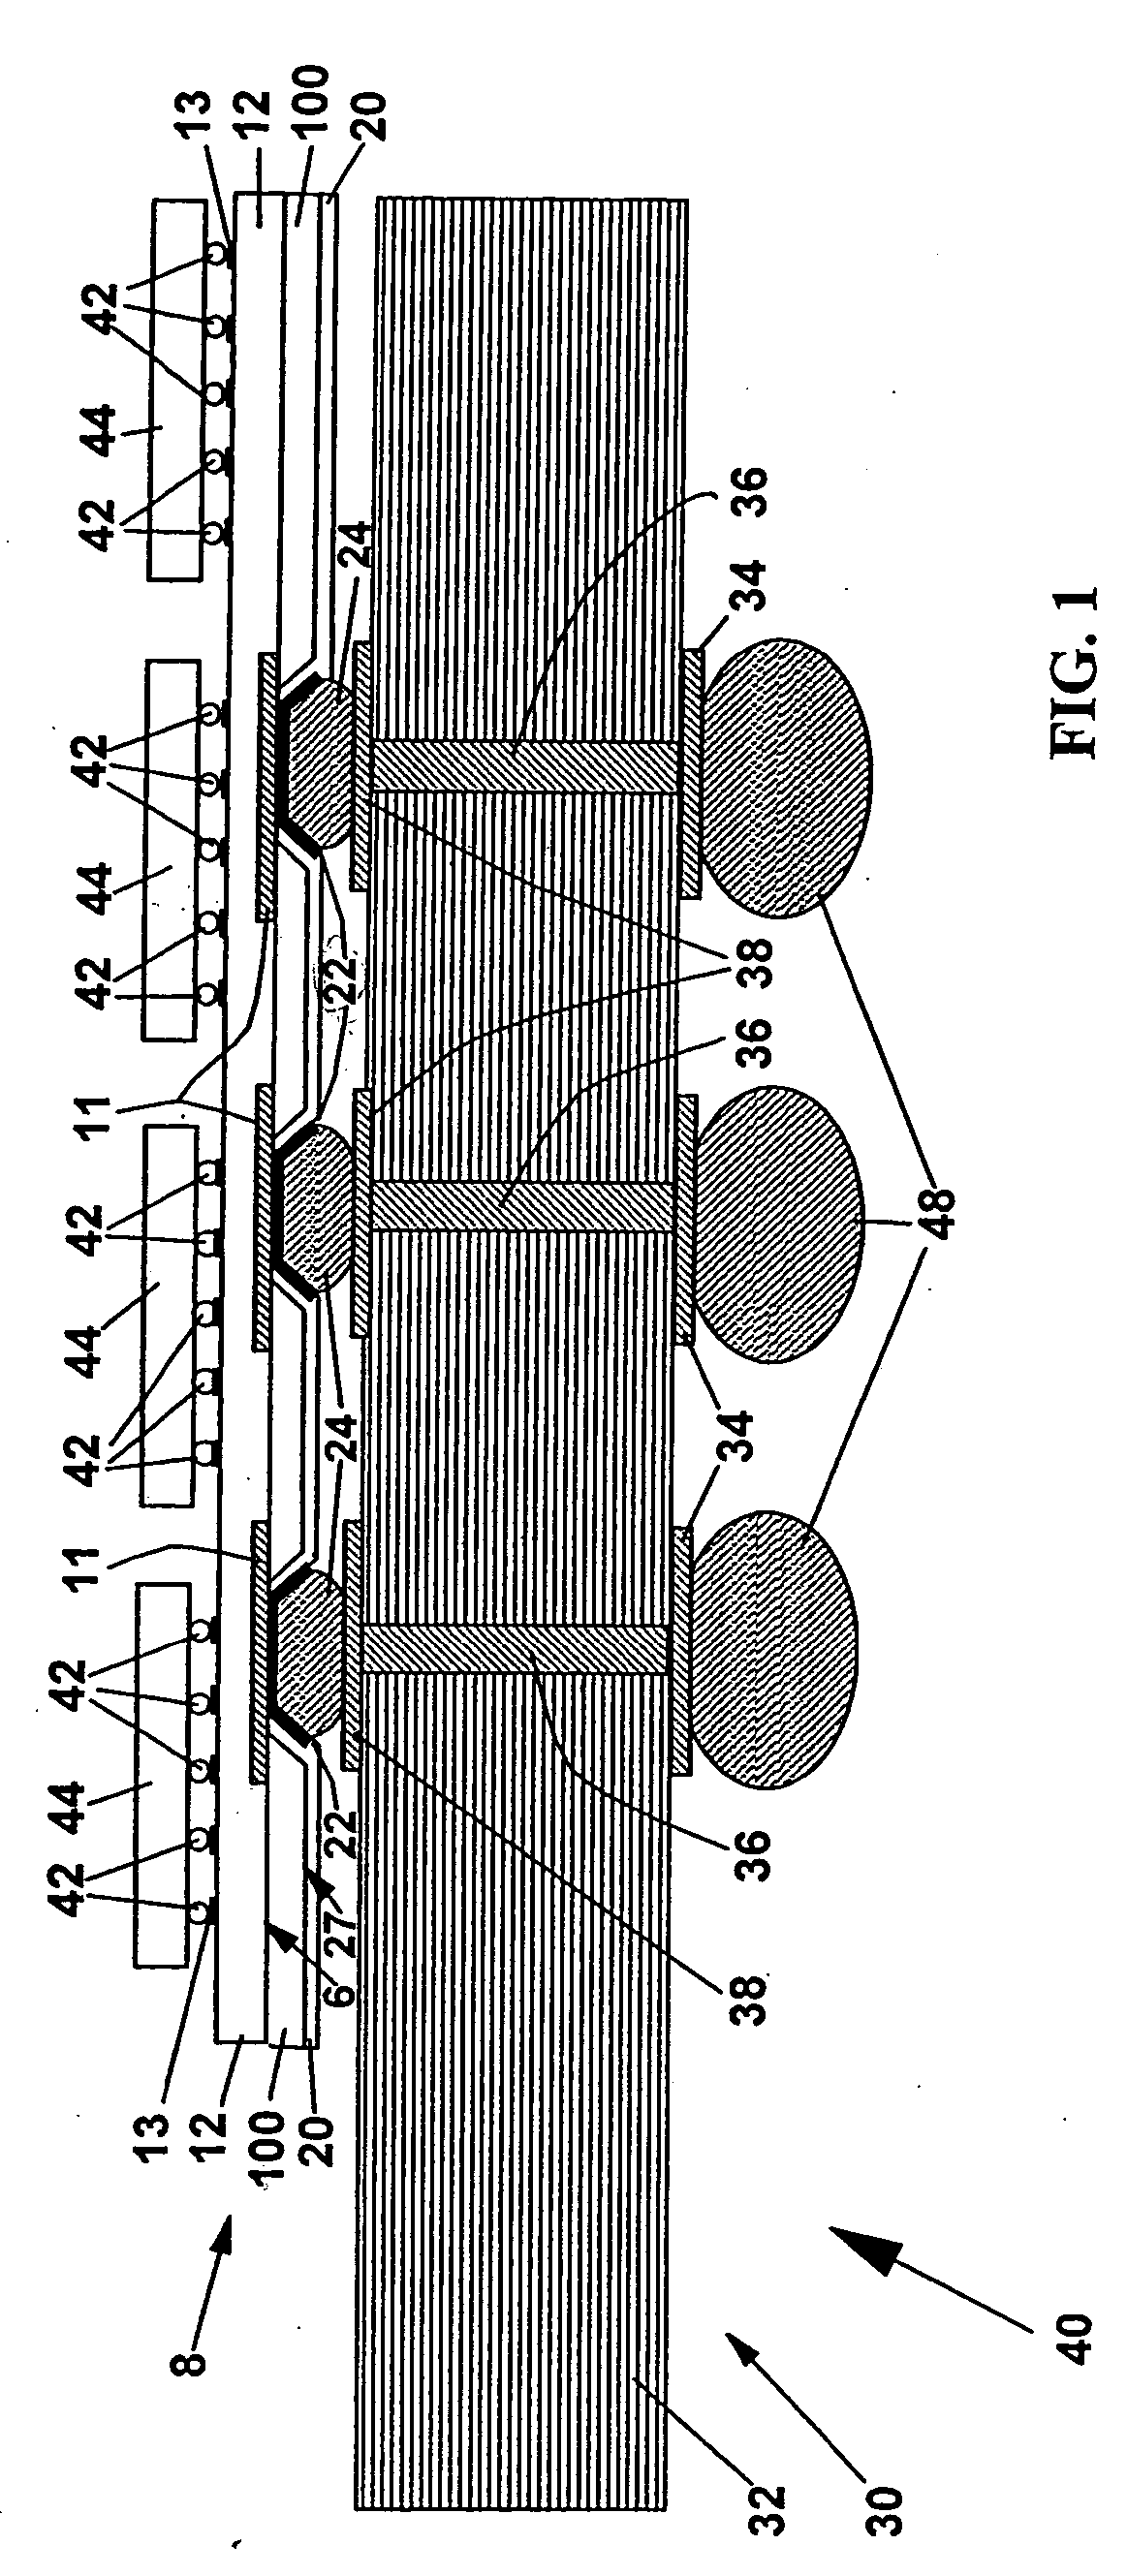 Method of manufacture of silicon based package and devices manufactured thereby